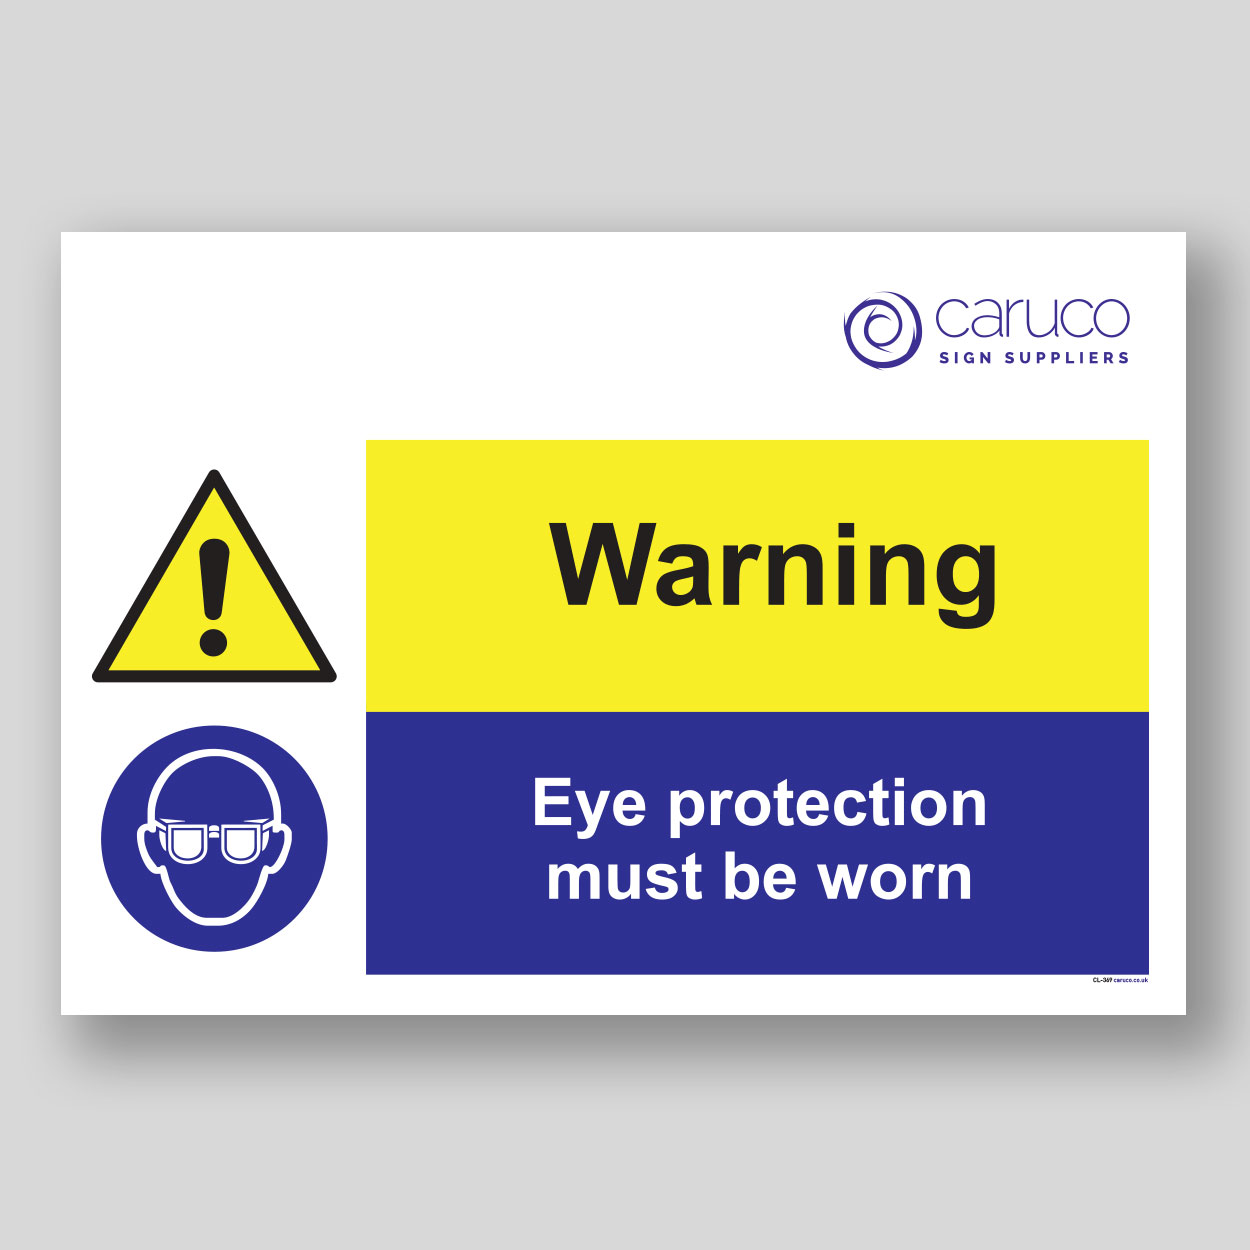 CL-369 Warning - eye protection